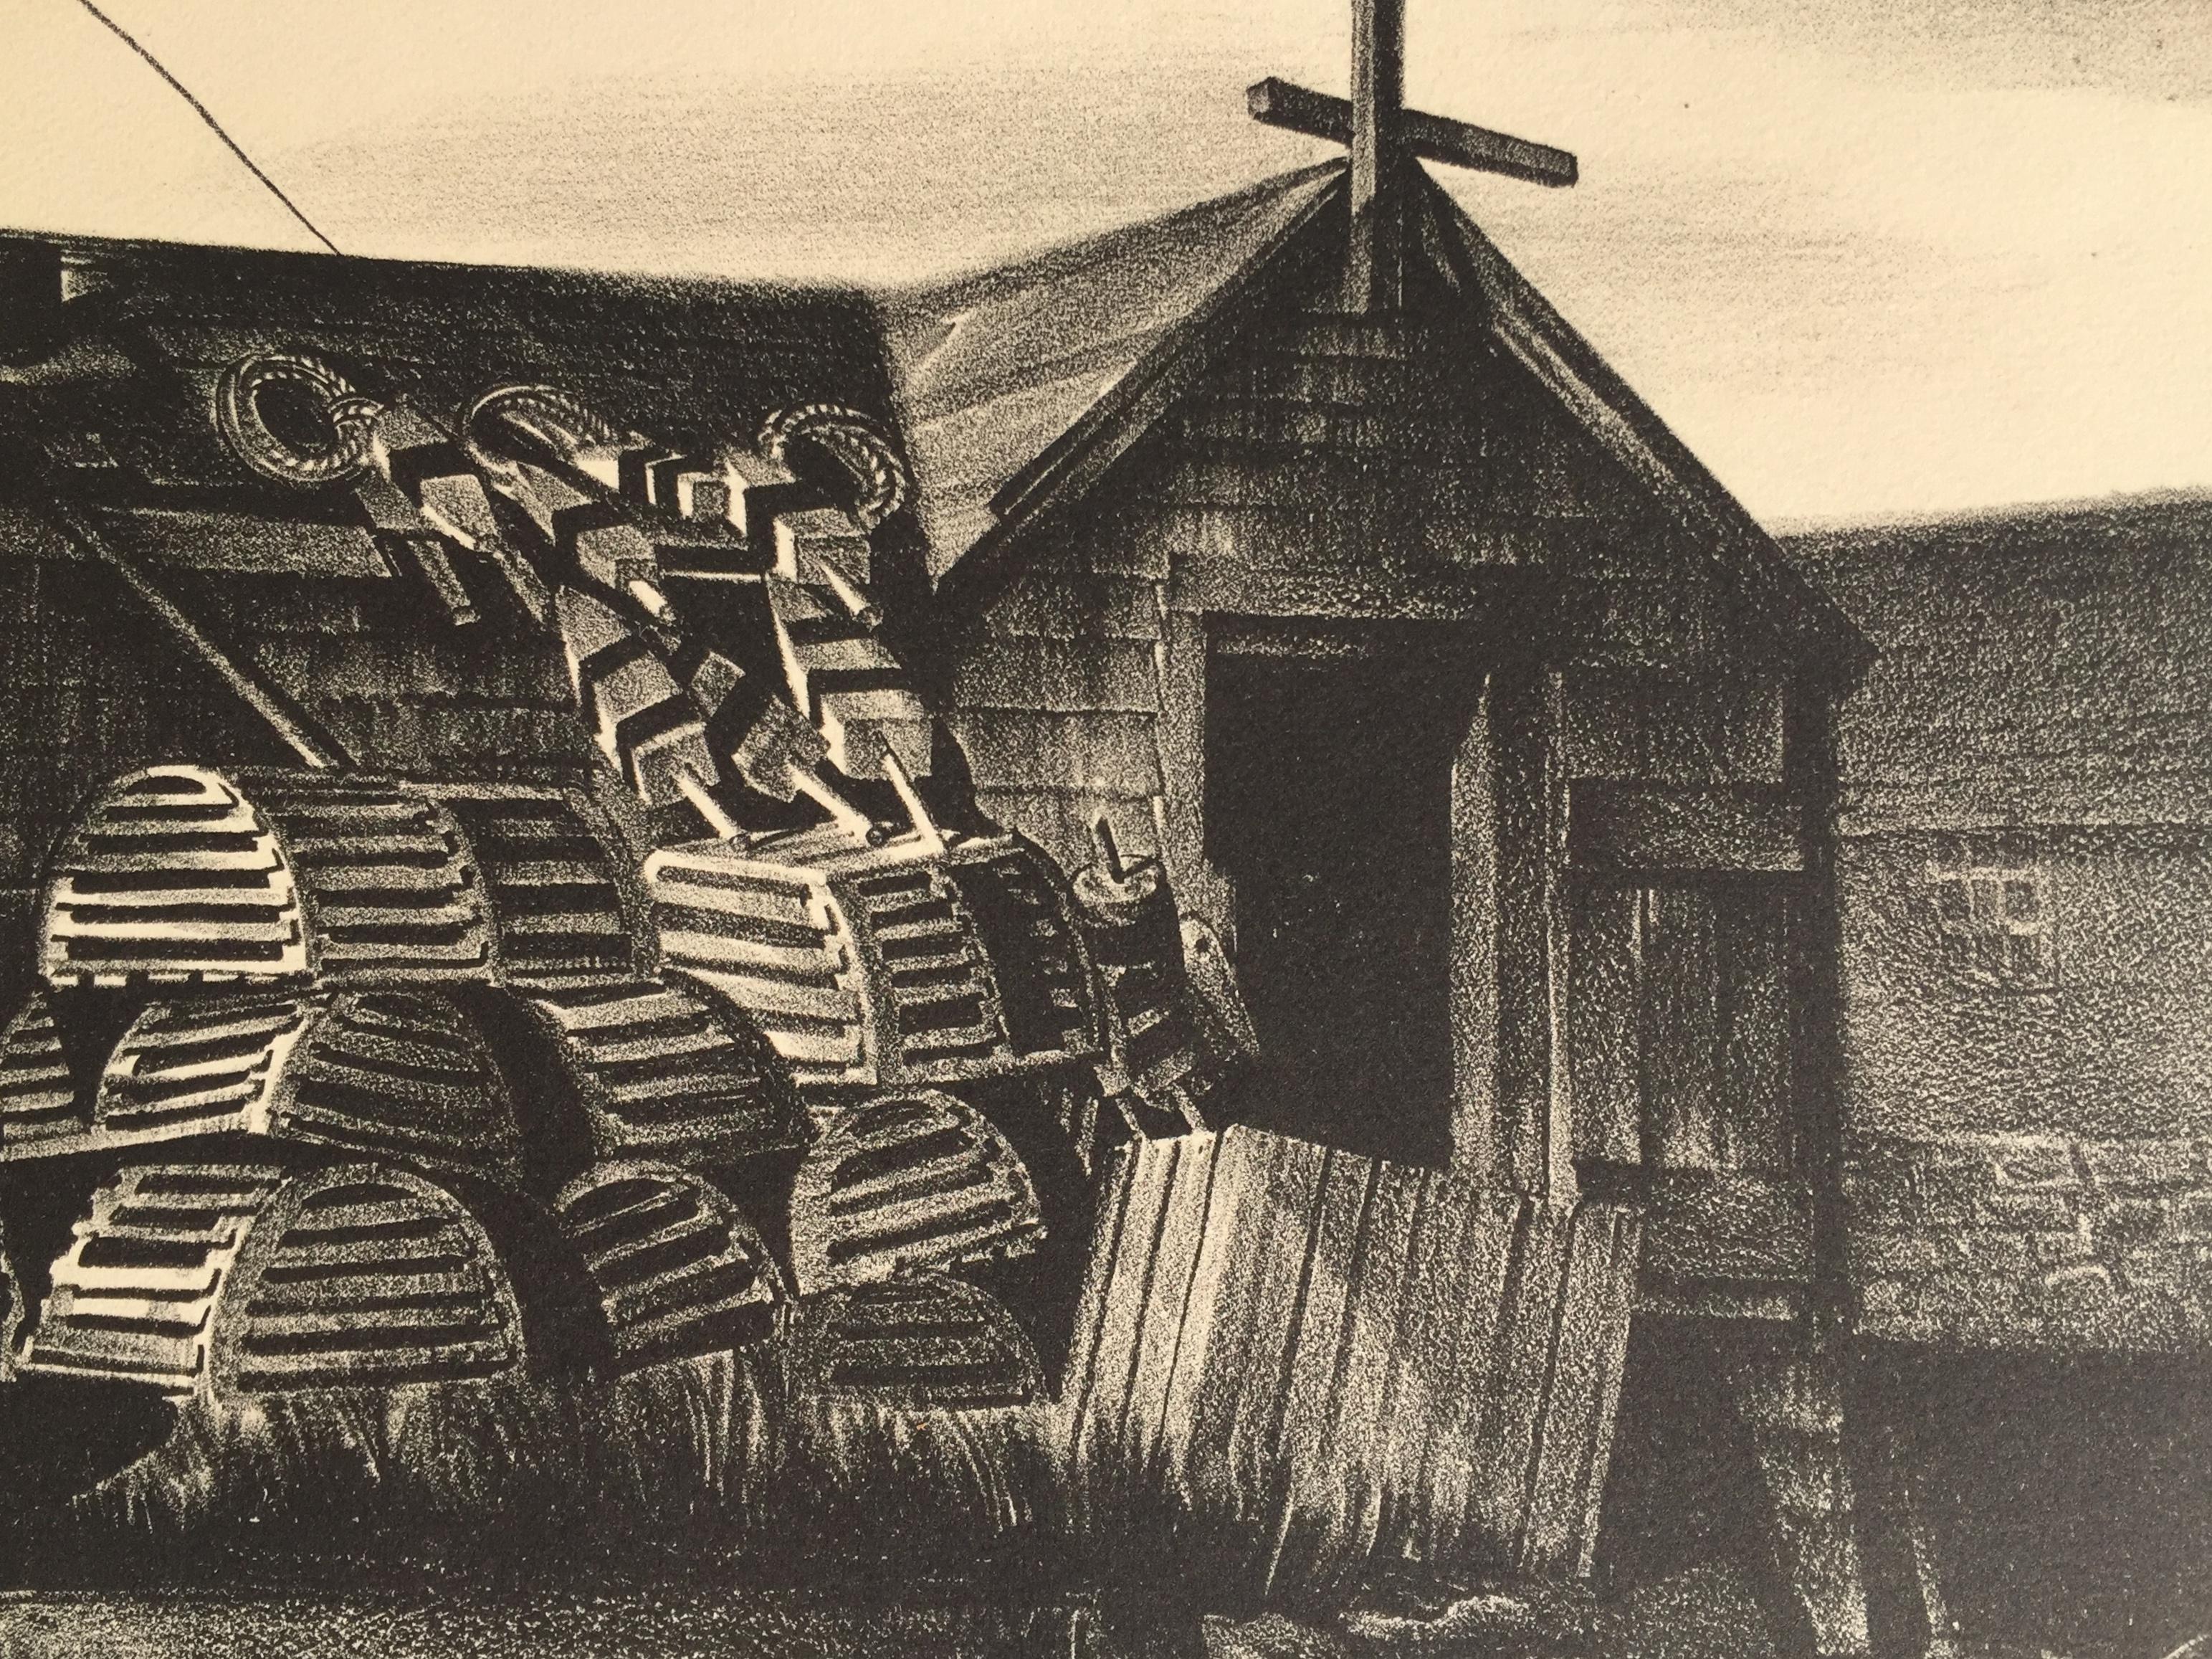 STOW WENGENROTH ( 1906-1978)

LOBSTERMAN'S HOUSE, 1934, (S. 41)
Lithograph, Signed and numbered 21 in pencil, (the edition). Very nice early Wengenroth in very good condition. Full margins, deckle edge. Image 9 x 12 inches, sheet 11 3/8 x 16 inches.